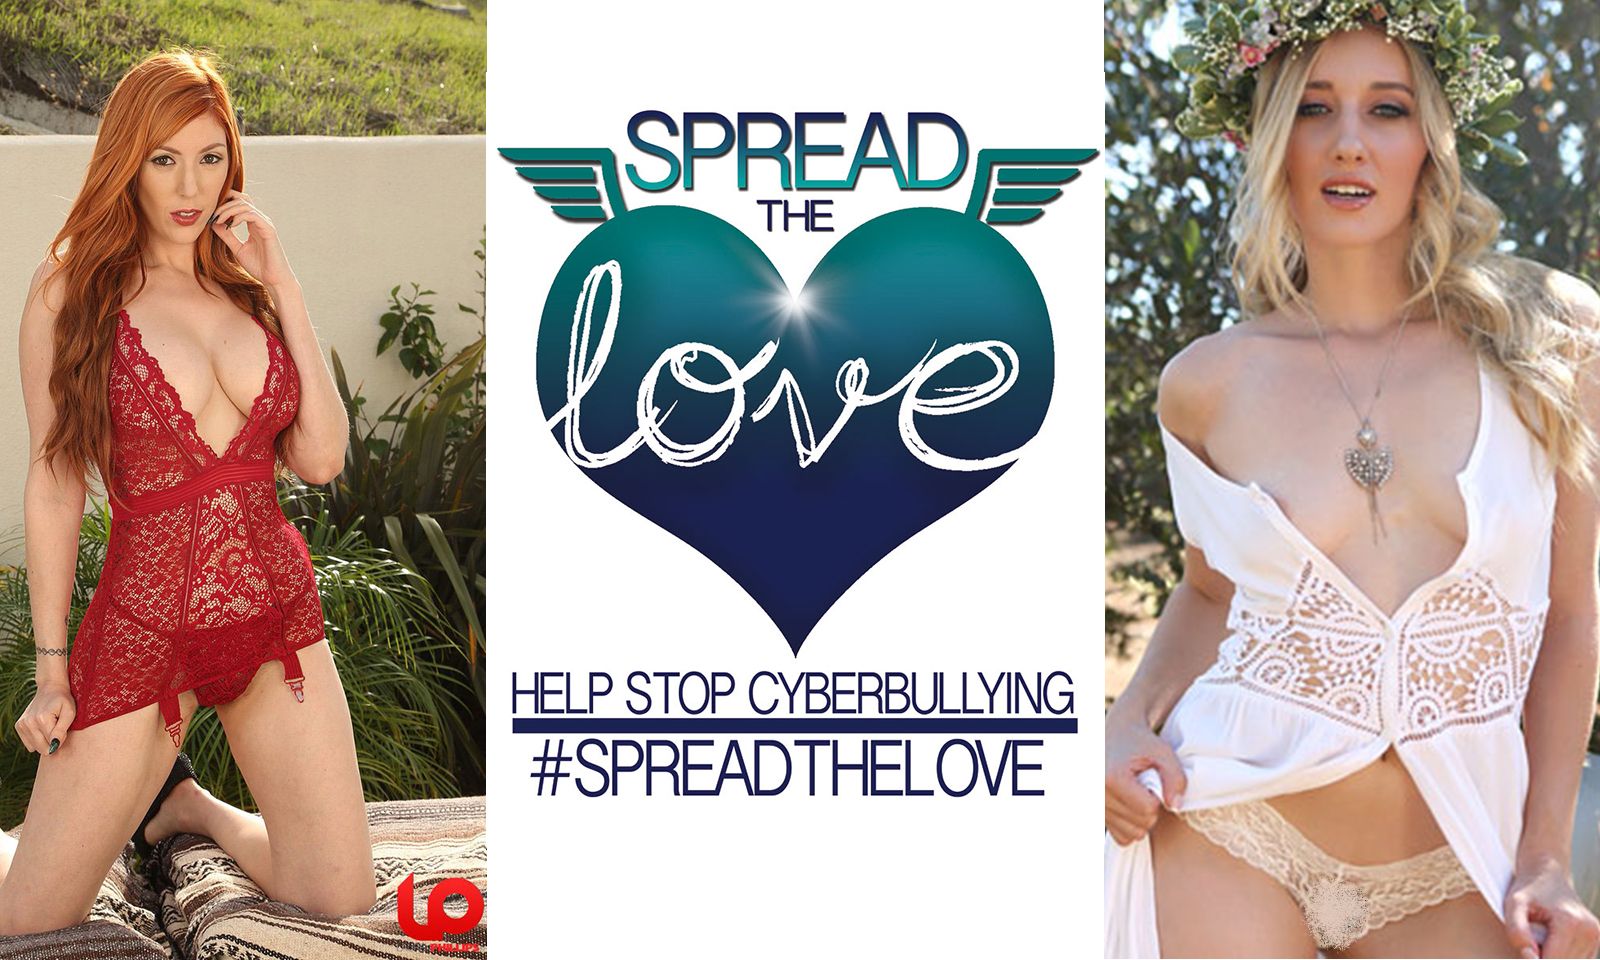 Riley Reyes Supplies More Info On APAC's #spreadthelove Party